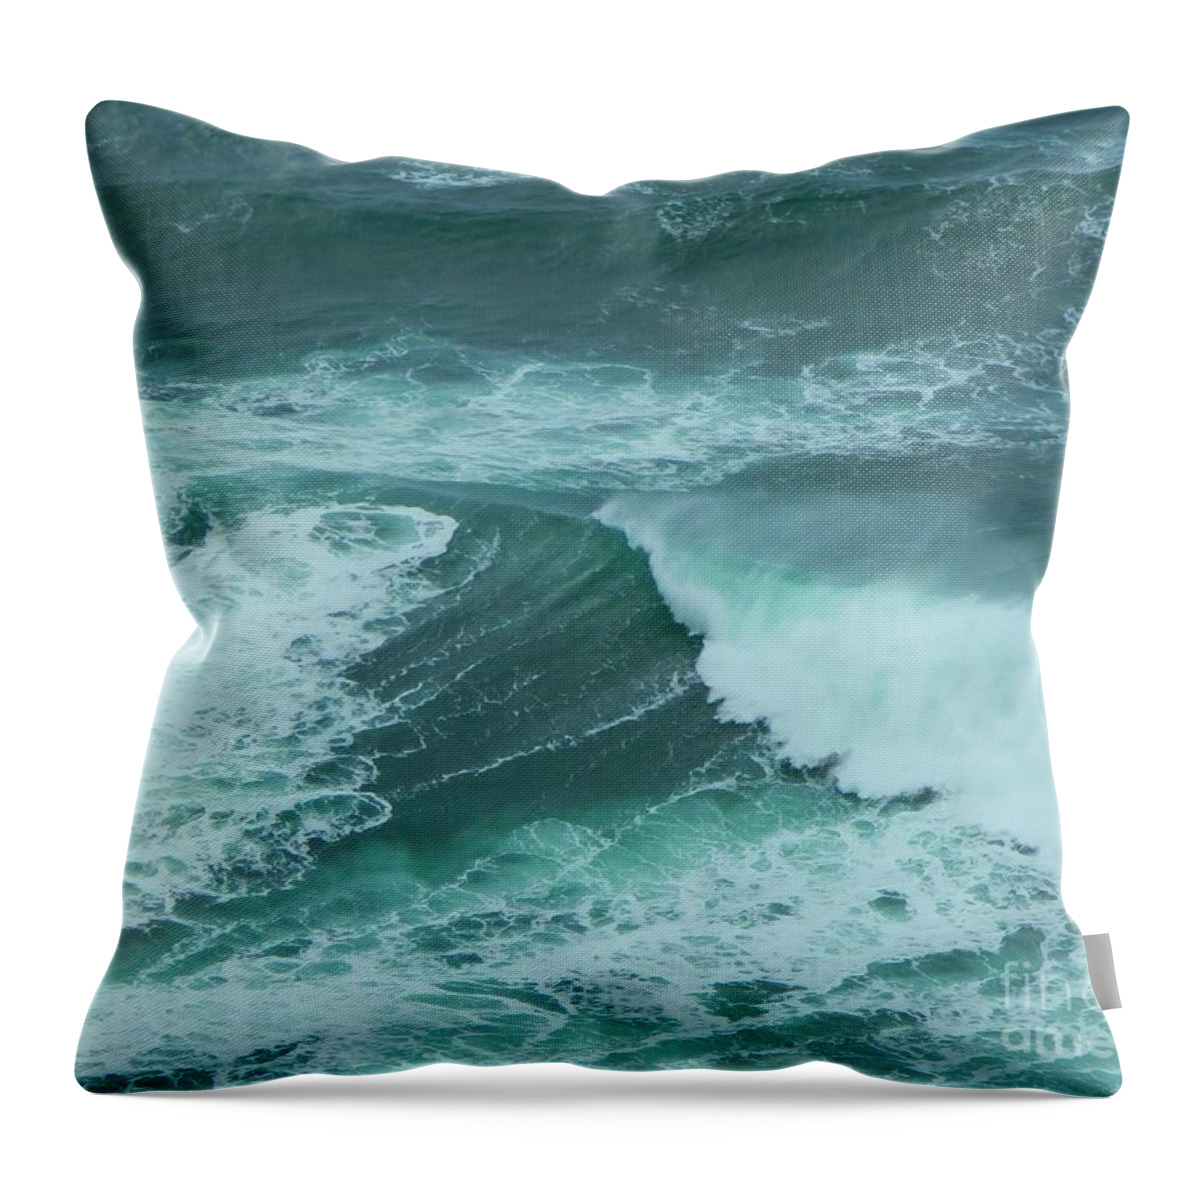 Oregon Throw Pillow featuring the photograph Wave 6 by Gallery Of Hope 